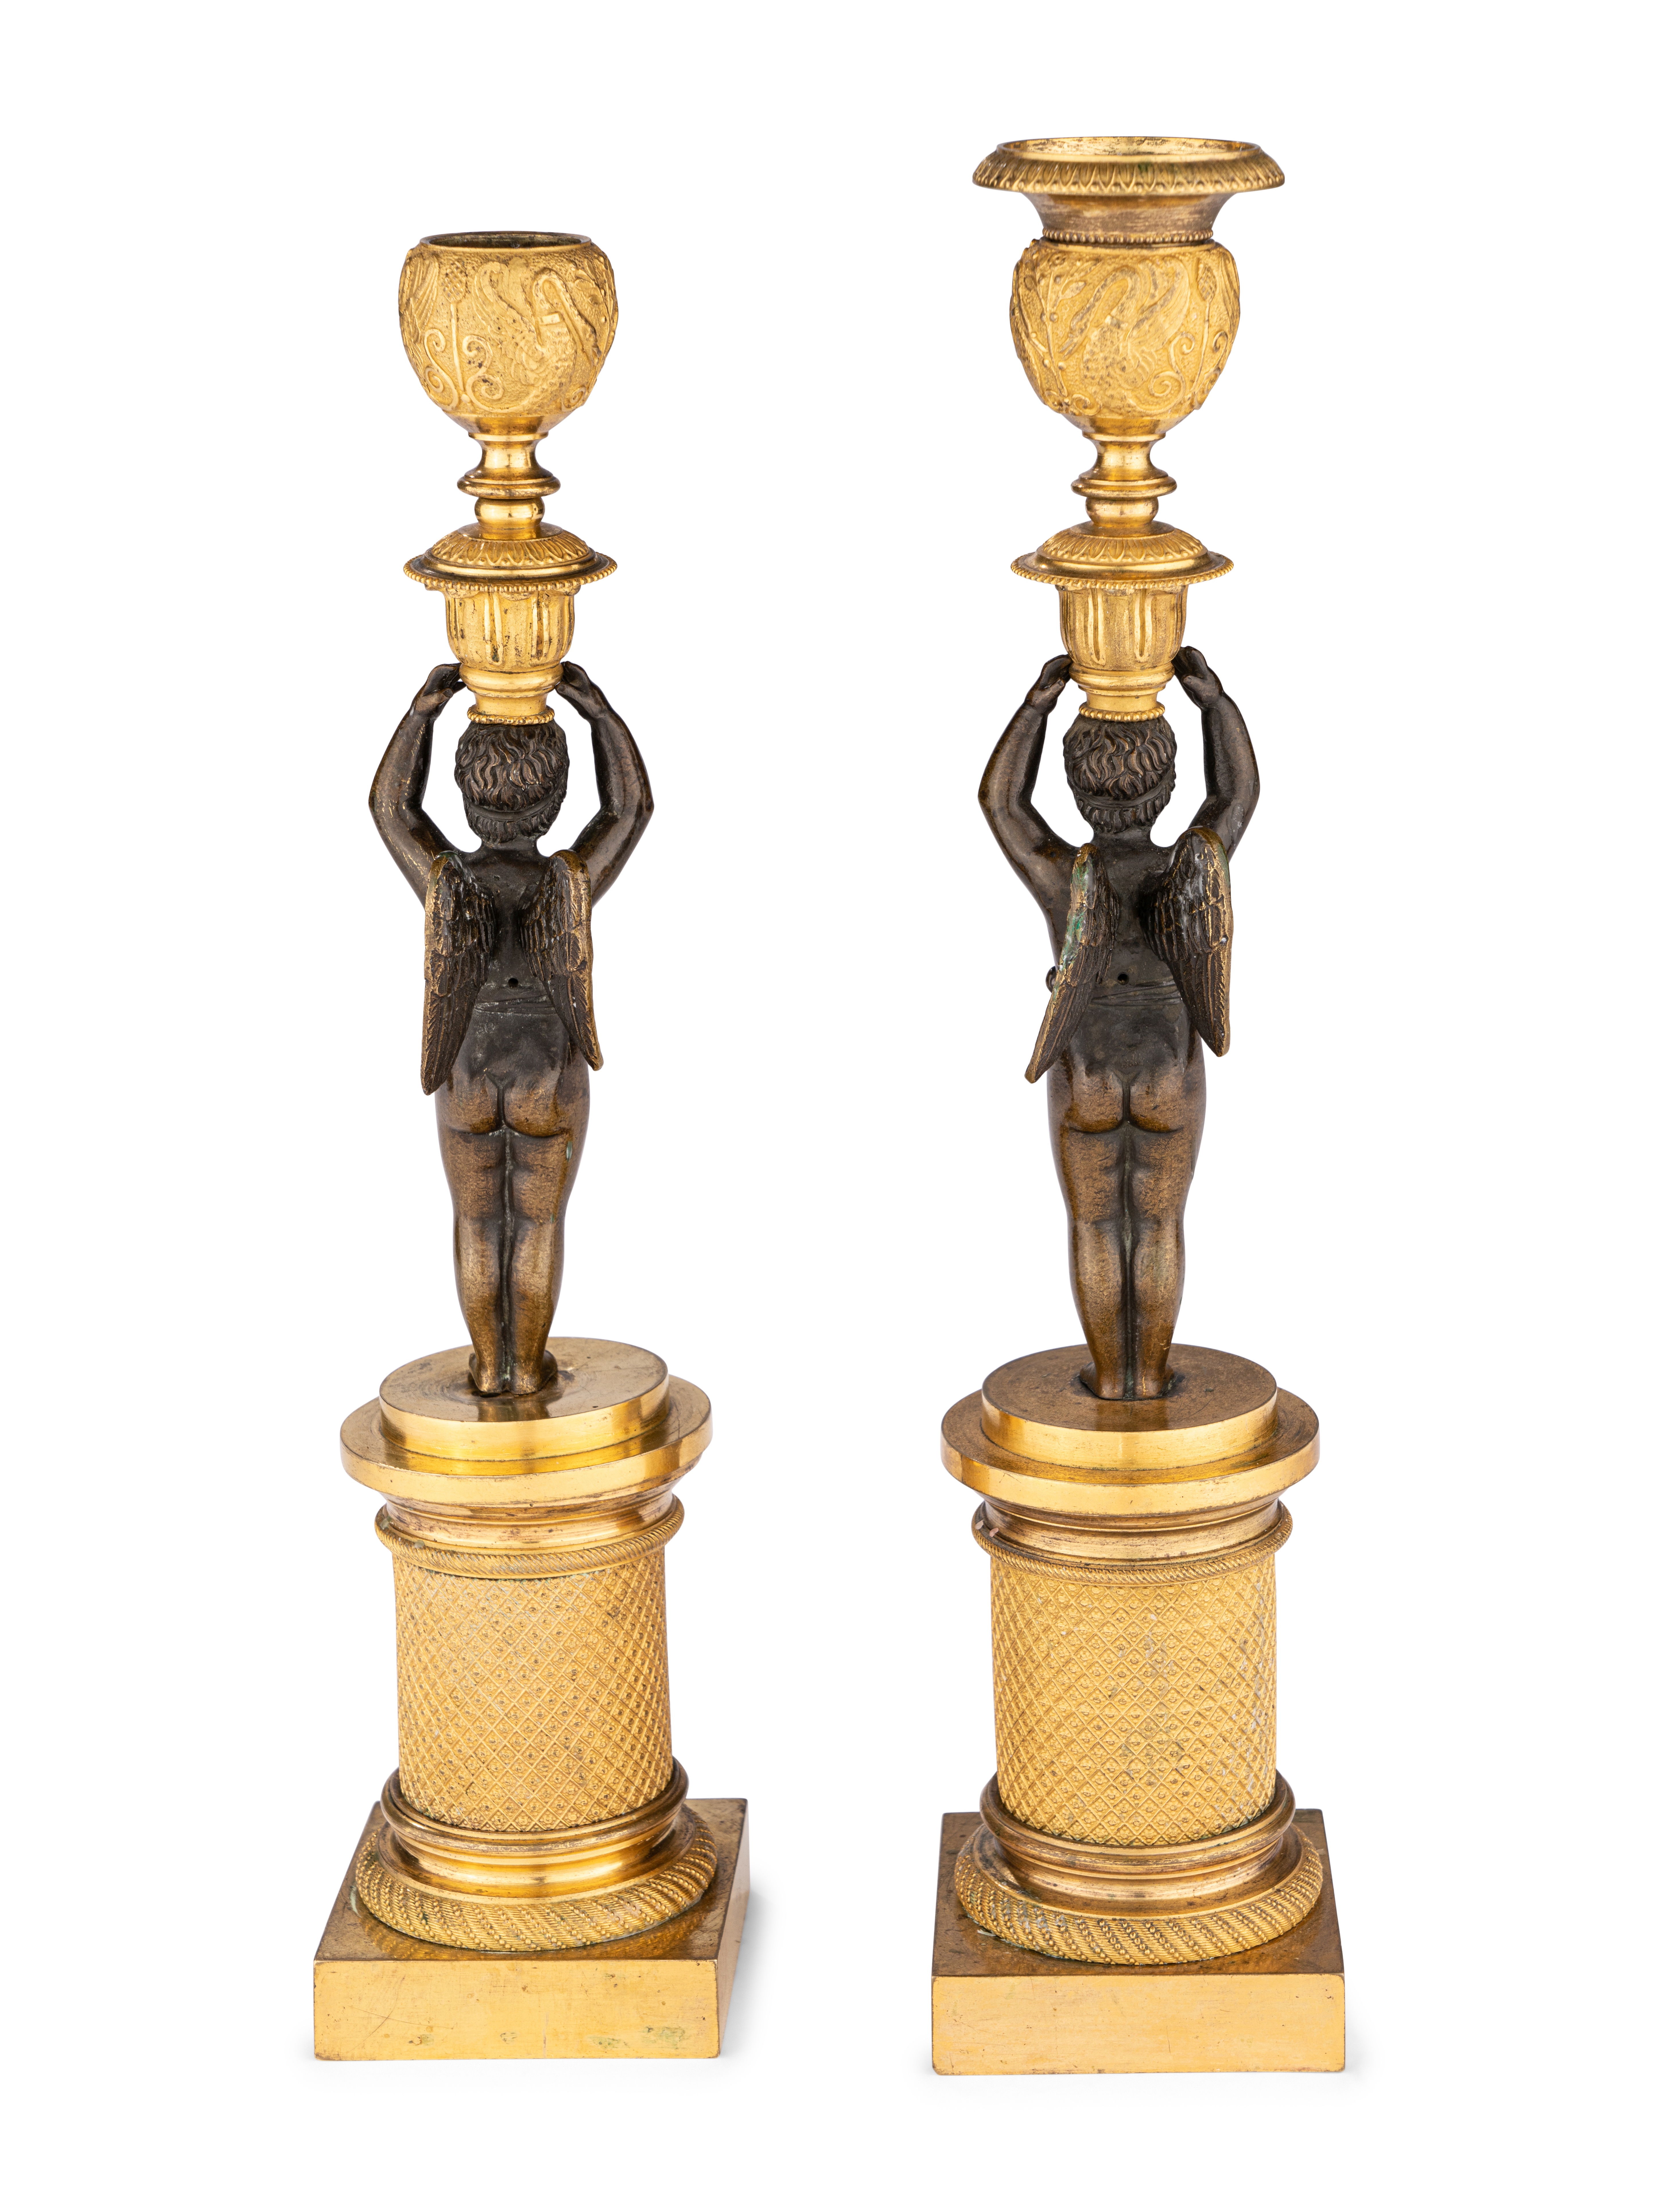 A Pair of Restauration Ormolu and Patinated Bronze Figural Candlesticks - Image 4 of 6